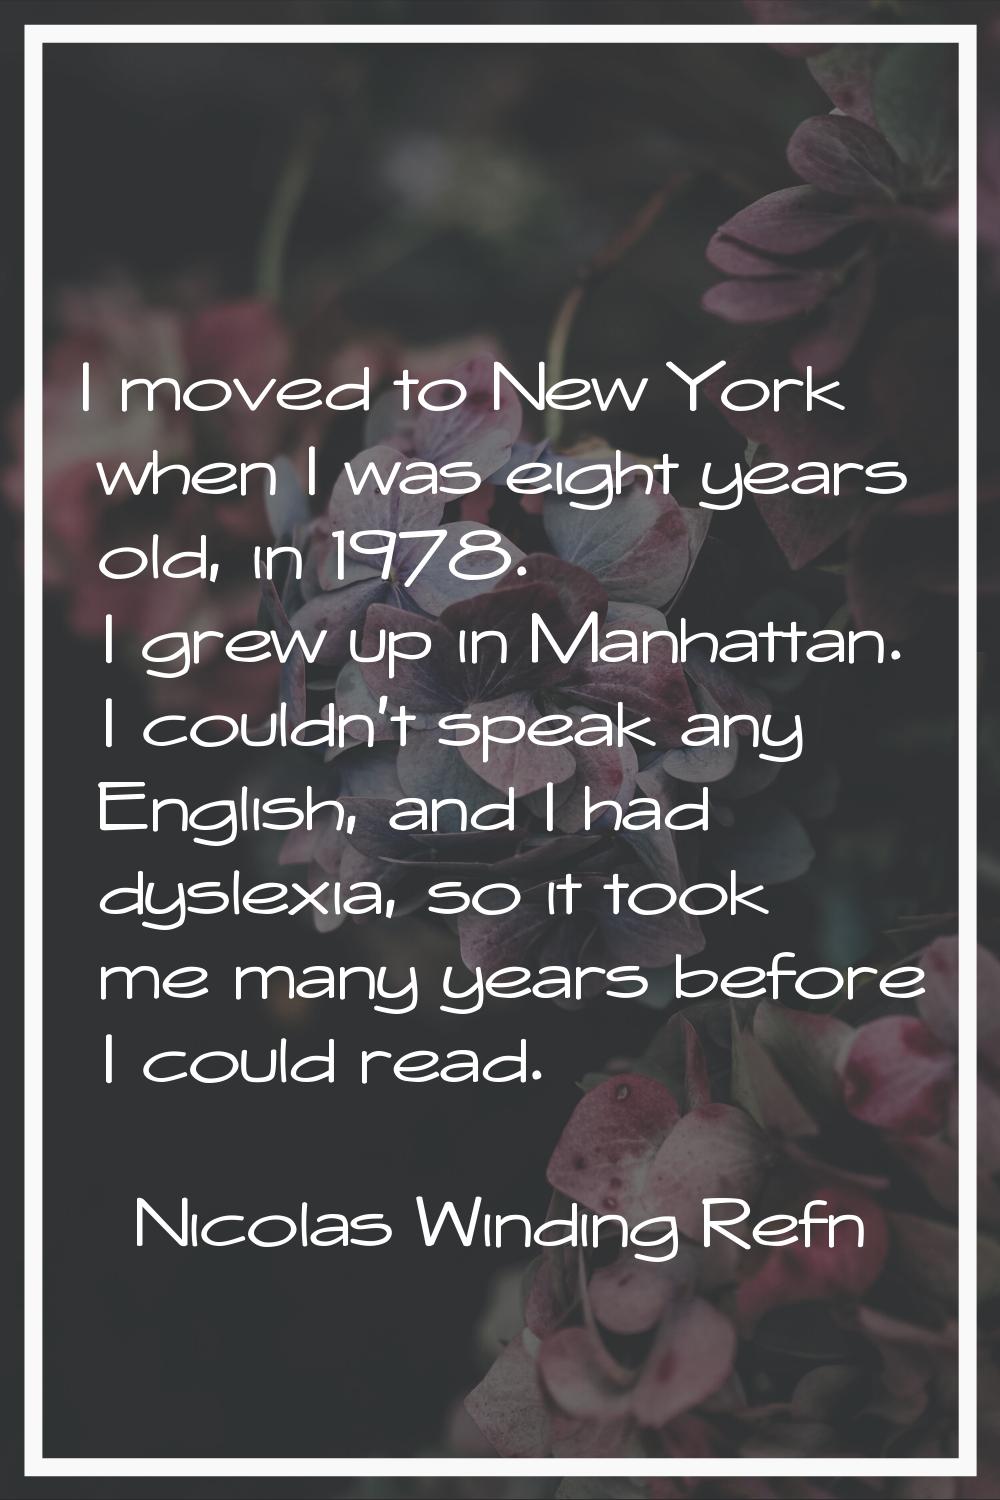 I moved to New York when I was eight years old, in 1978. I grew up in Manhattan. I couldn't speak a